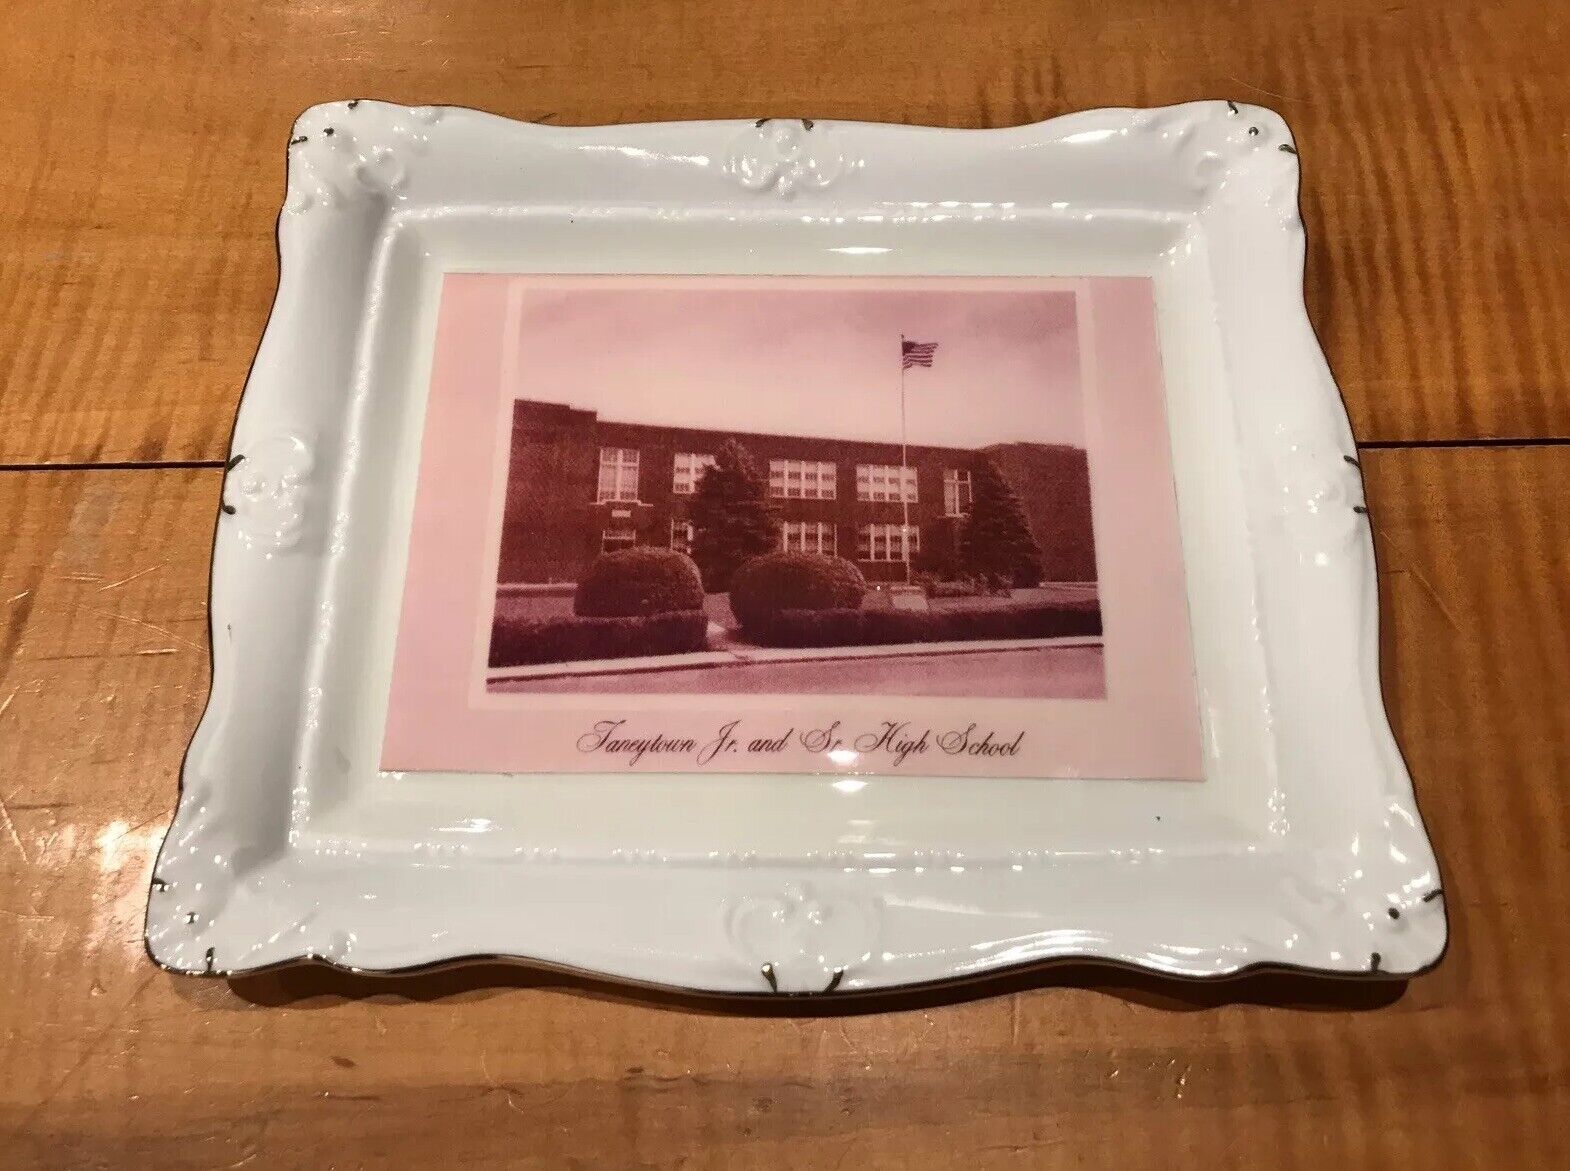 Taneytown Maryland High School porcelain plate tray Photograph Vintage 1955 MINT